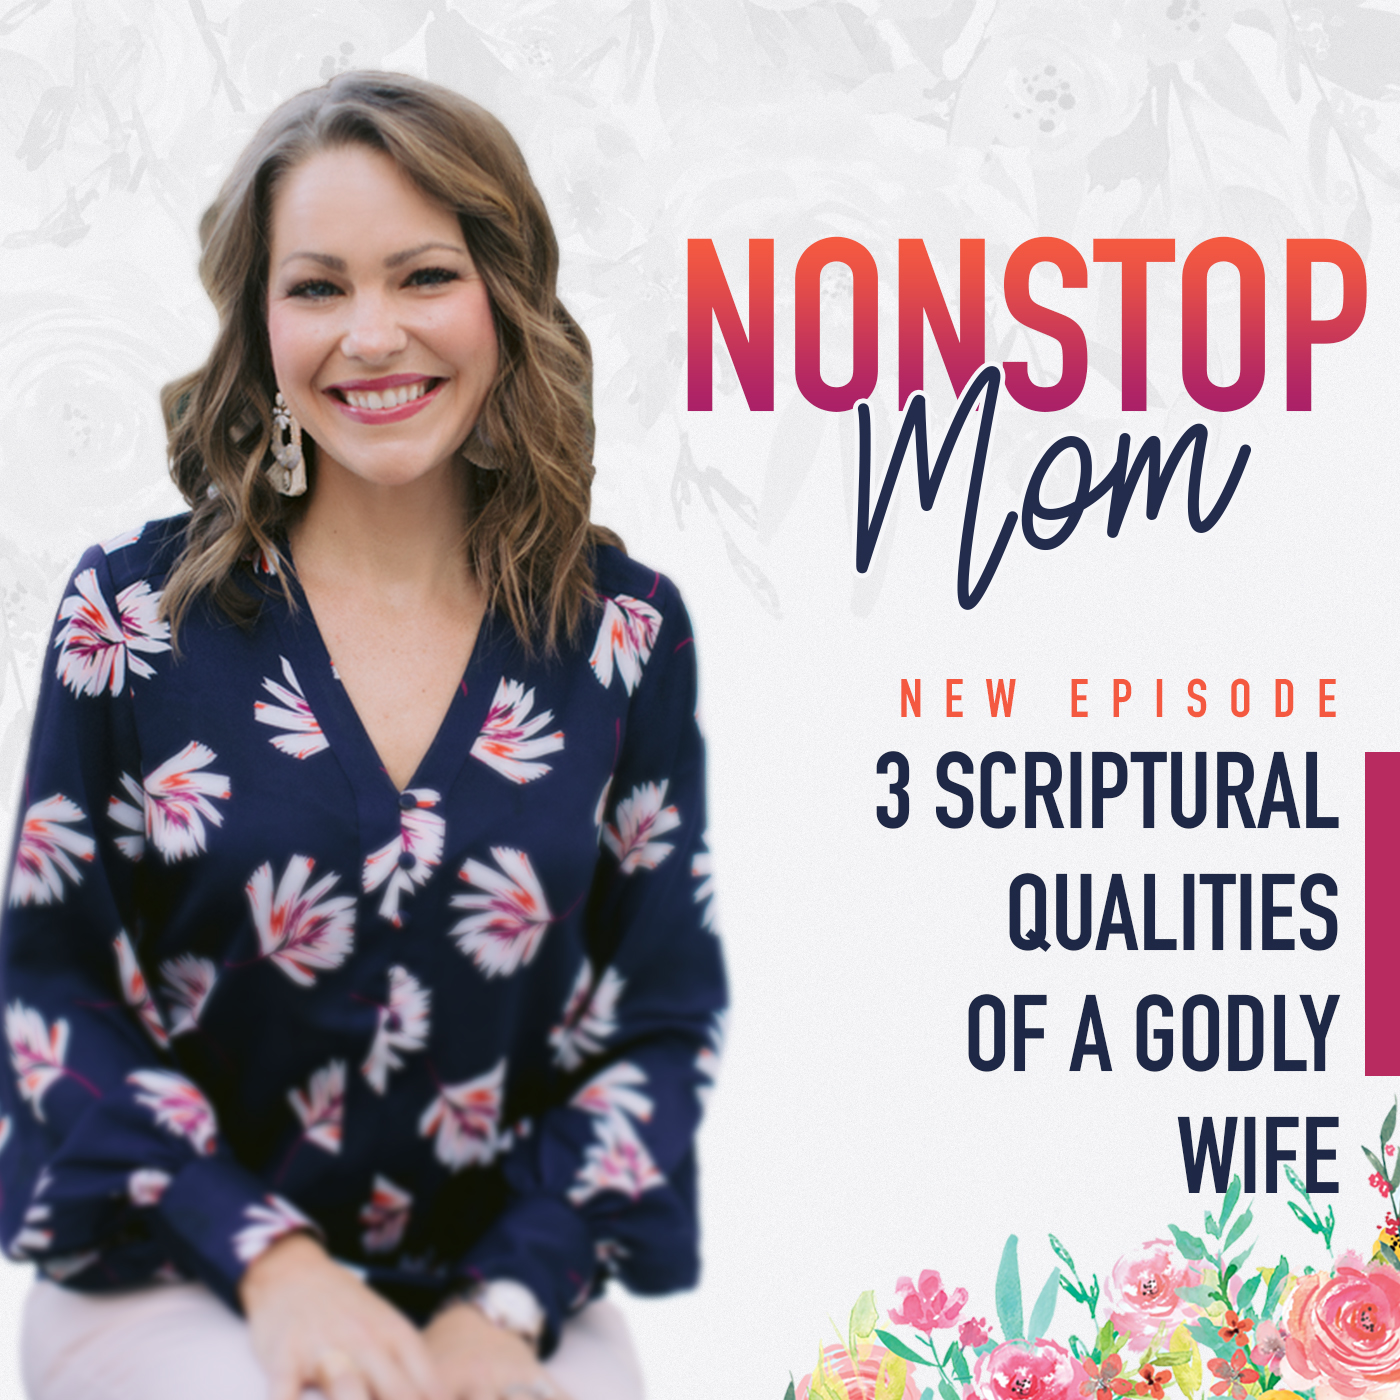 3 Scriptural Qualities of a Godly Wife on the Nonstop Mom Podcast with Carolyn Shuttlesworth